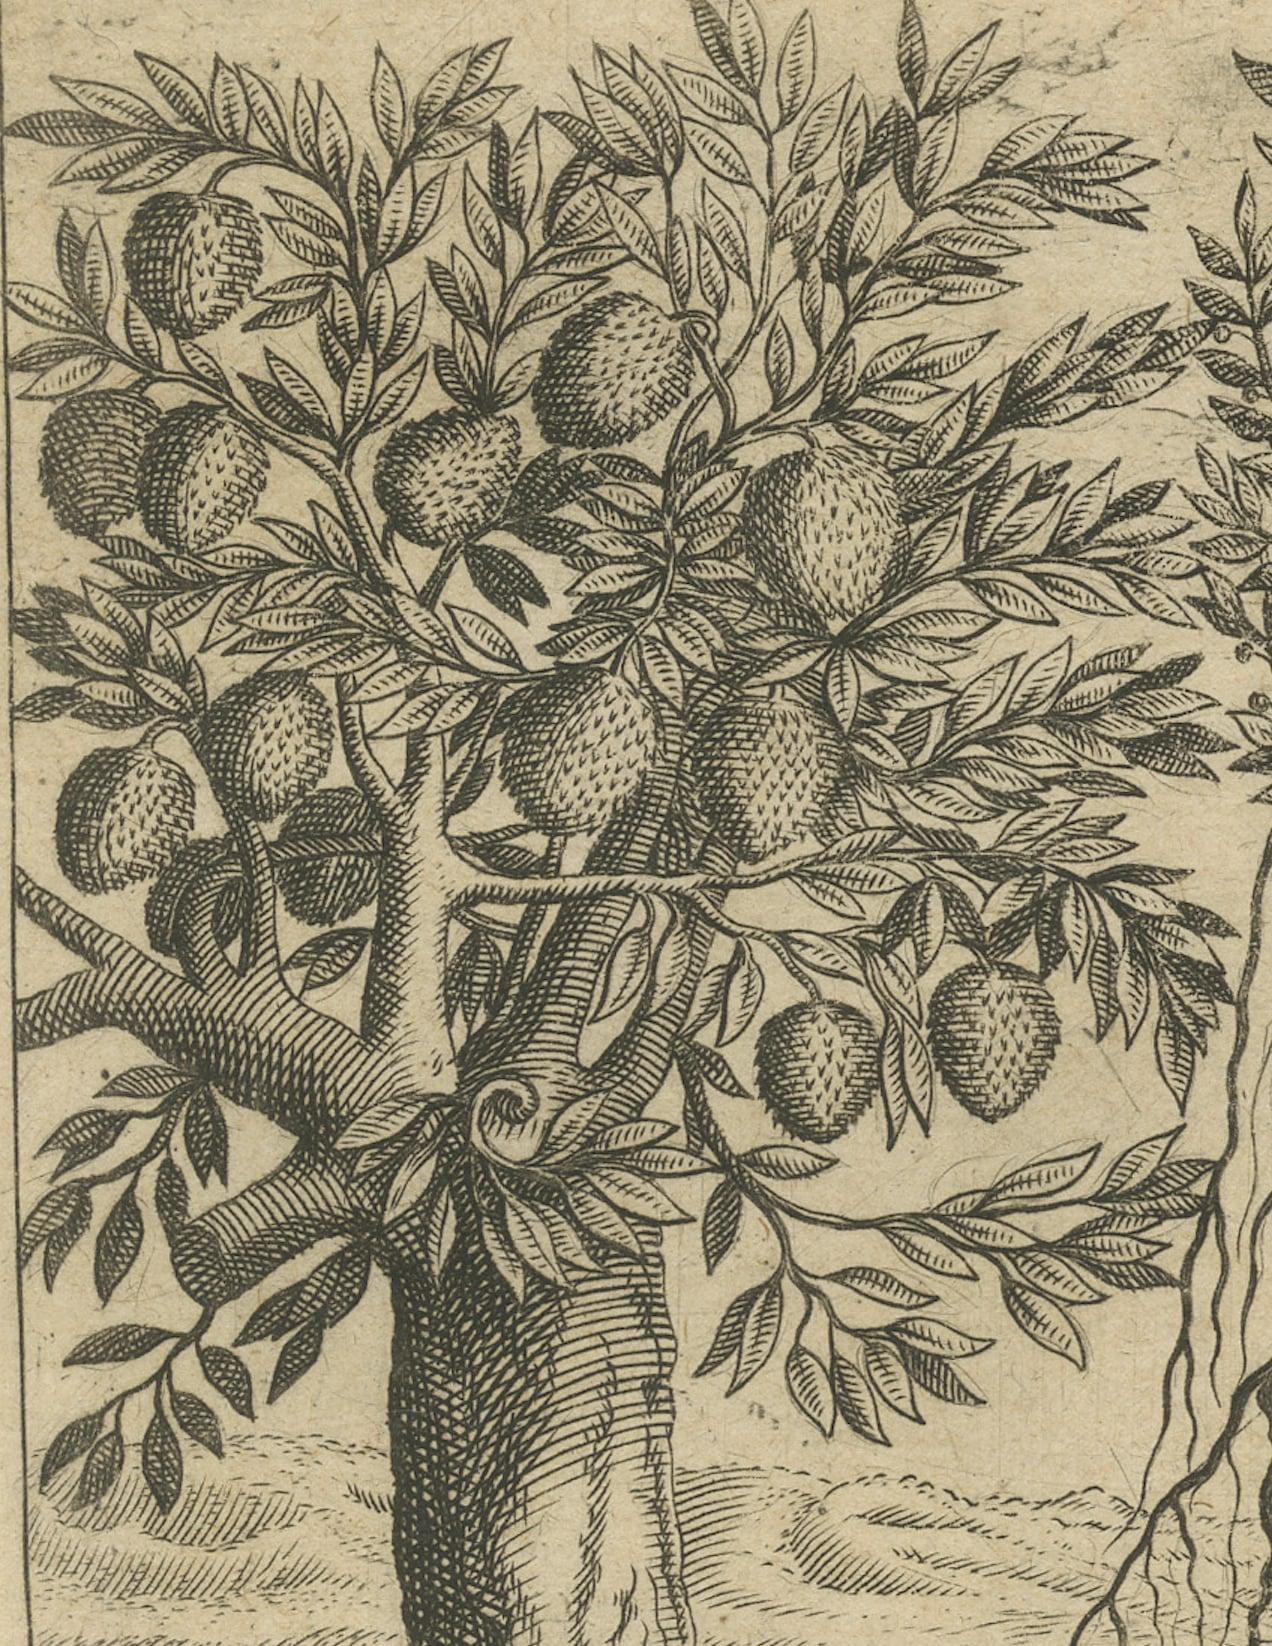 Paper Botanical Marvels of India: Bamboo and Durian in De Bry's 1601 Copper Engraving For Sale